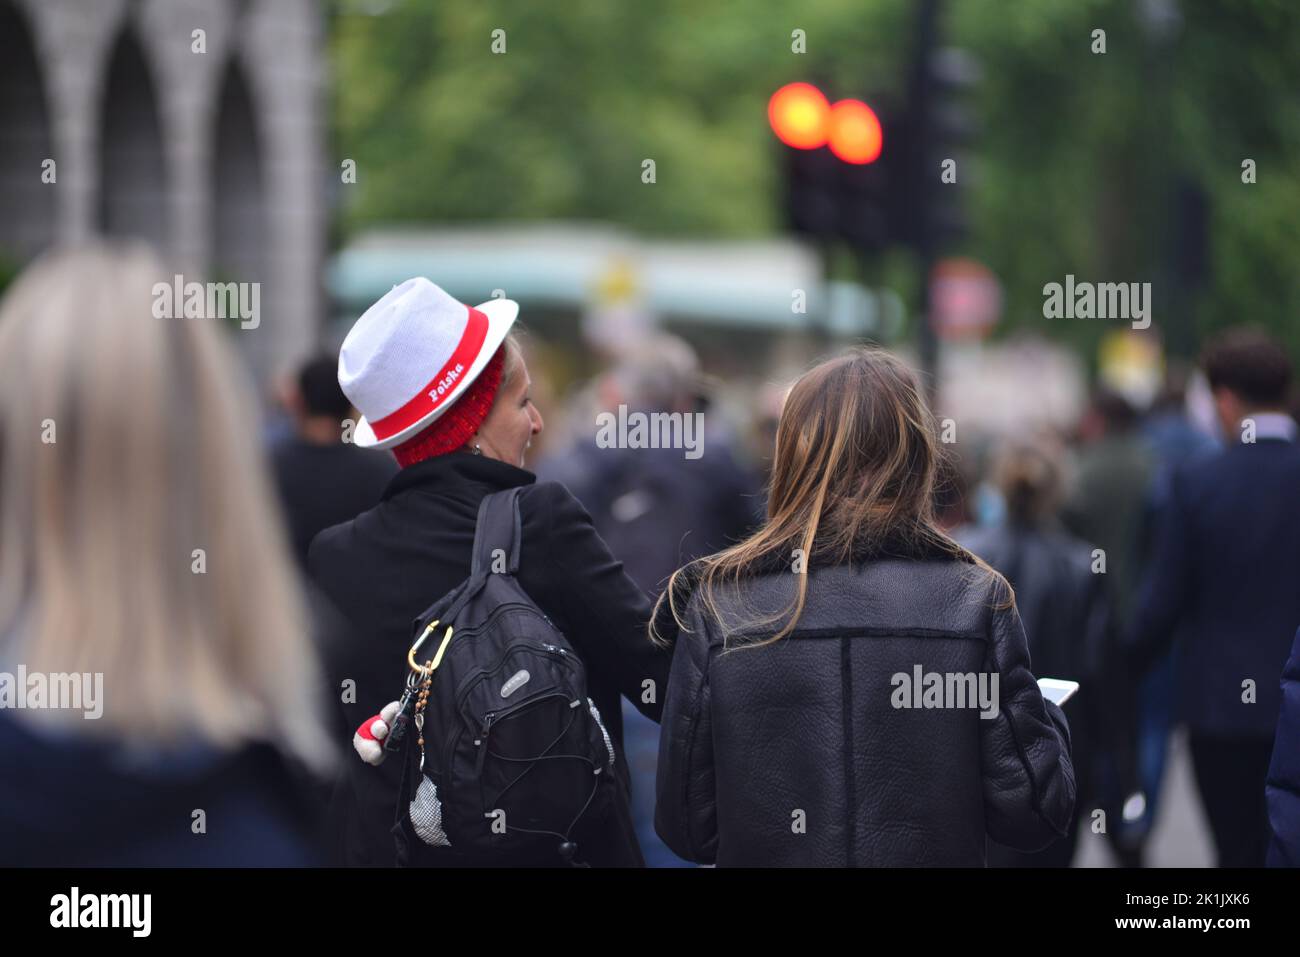 State funeral of Her Majesty Queen Elizabeth II, London, UK, Monday 19th September 2022. Woman wearing Polish Polska hat among the mourners heading to the event. Stock Photo